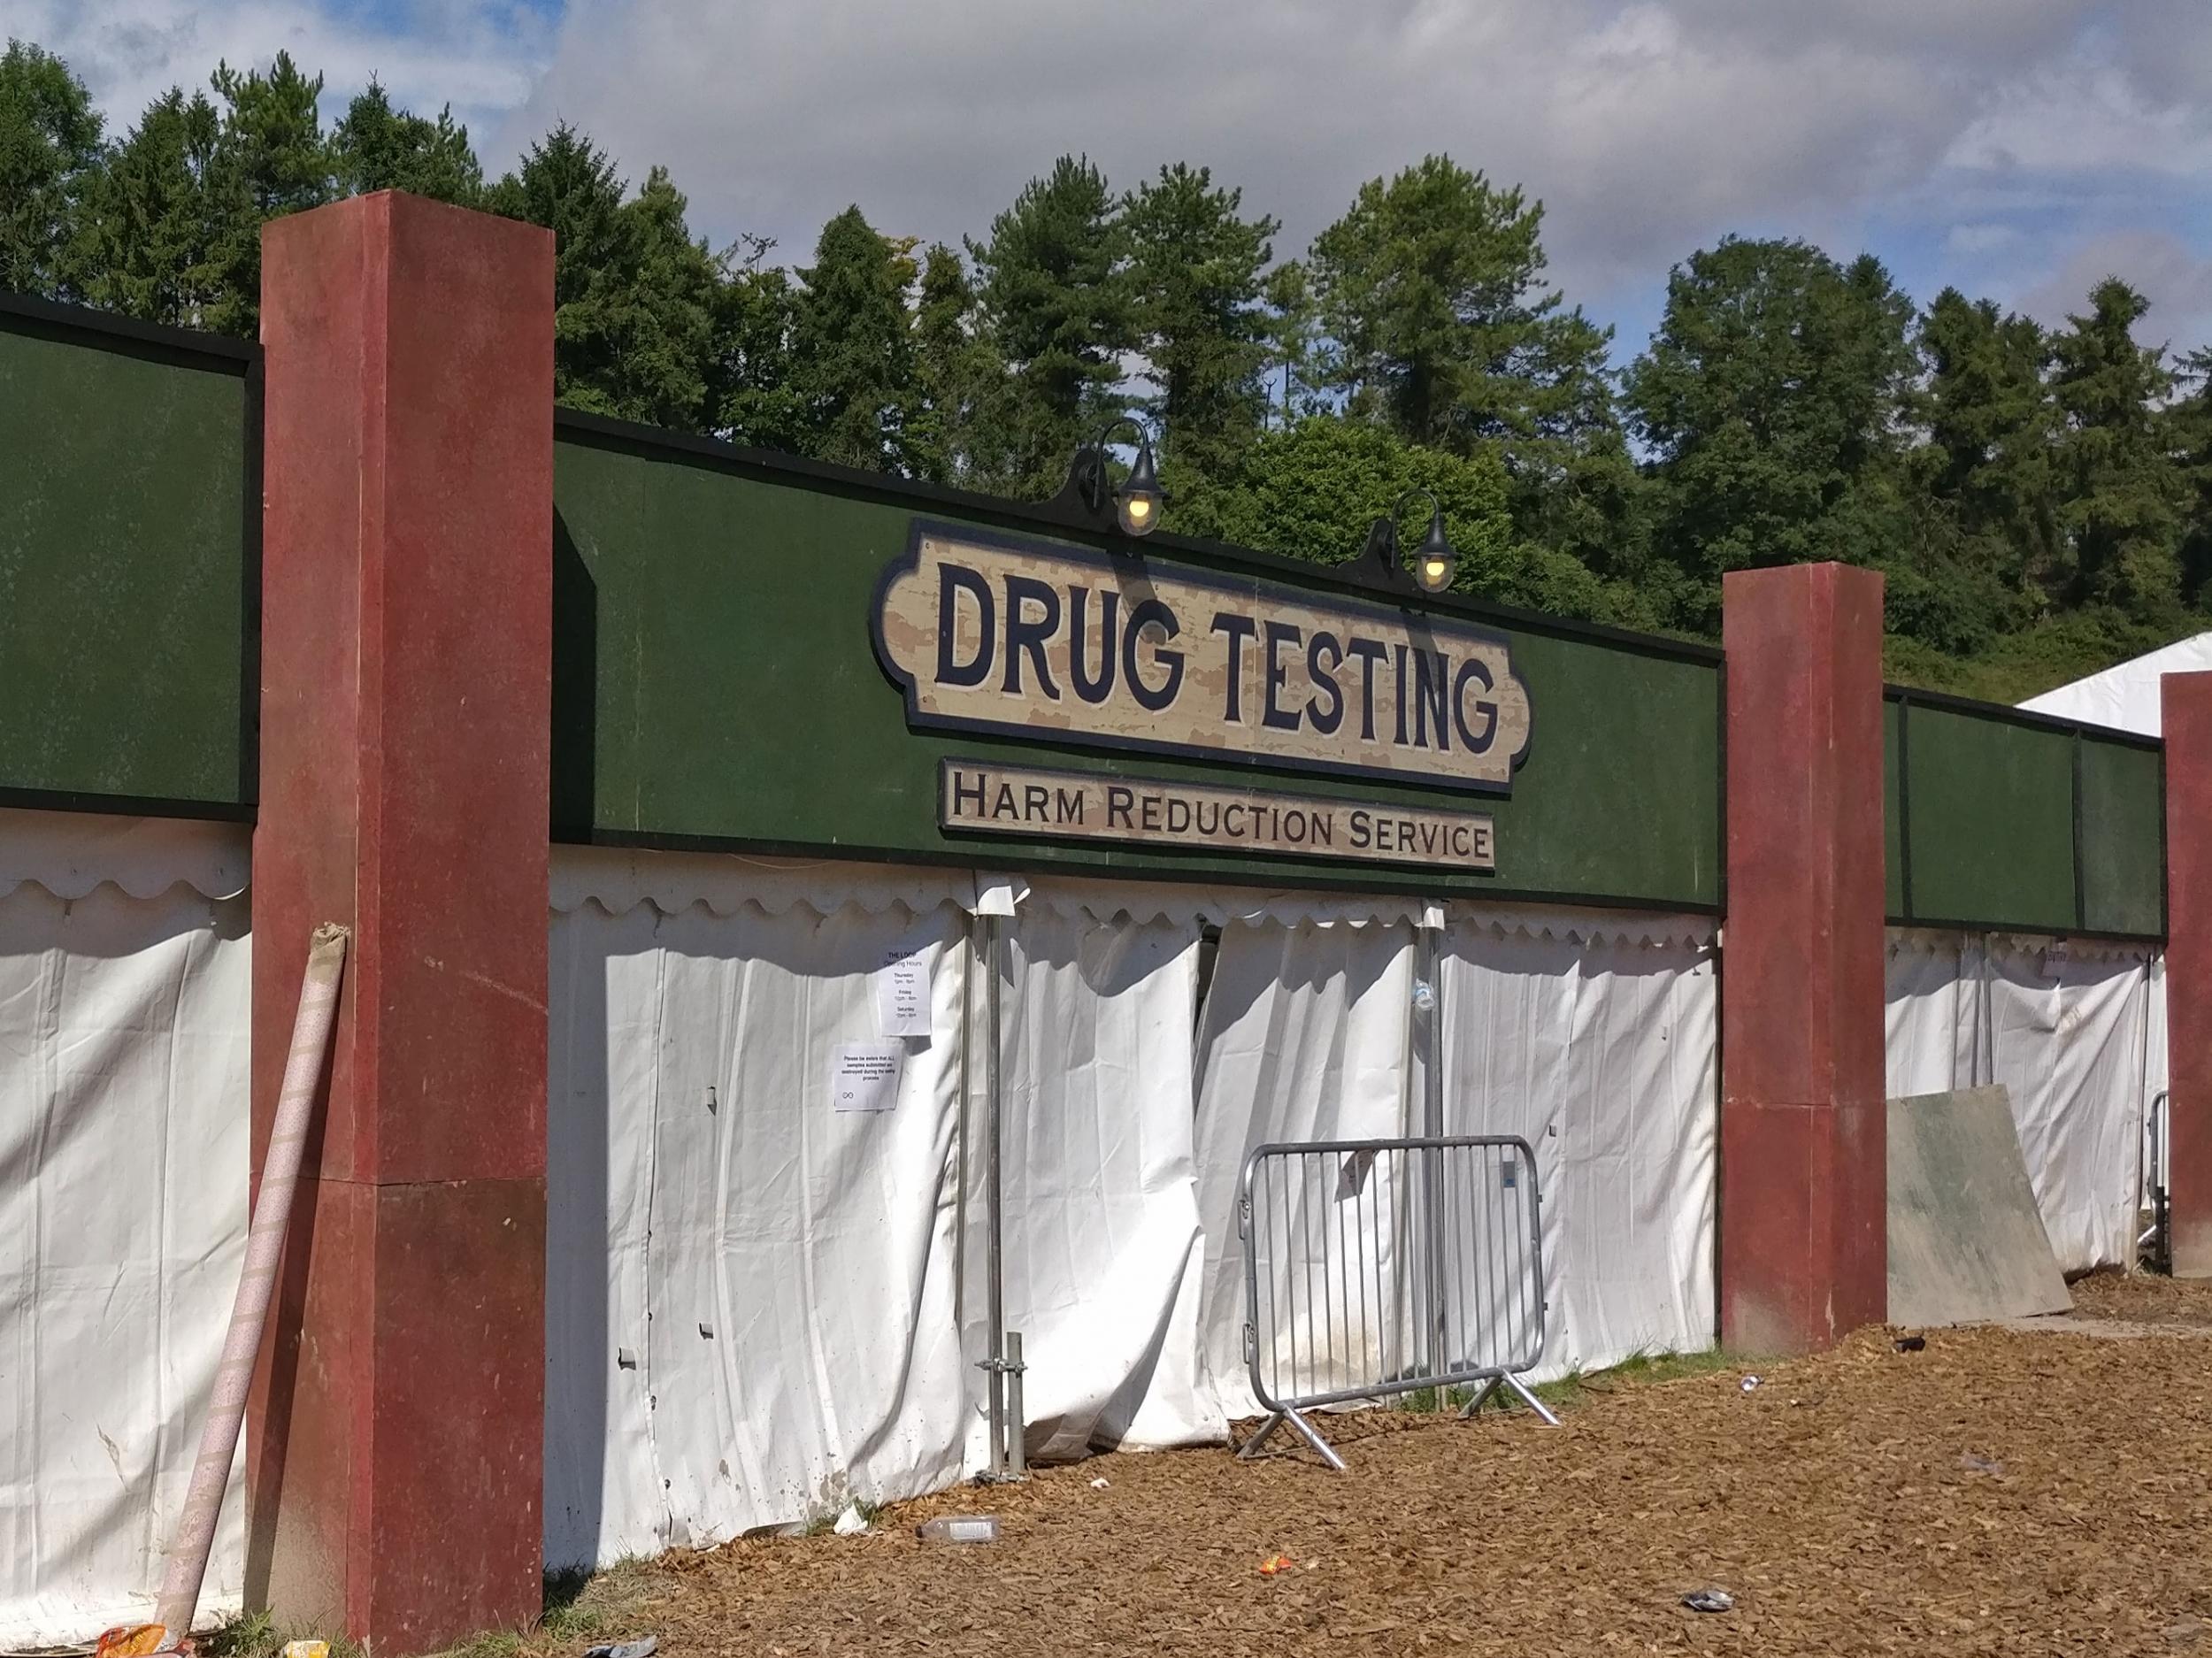 The tent housing The Loop, a drugs testing and counselling service for festivalgoers